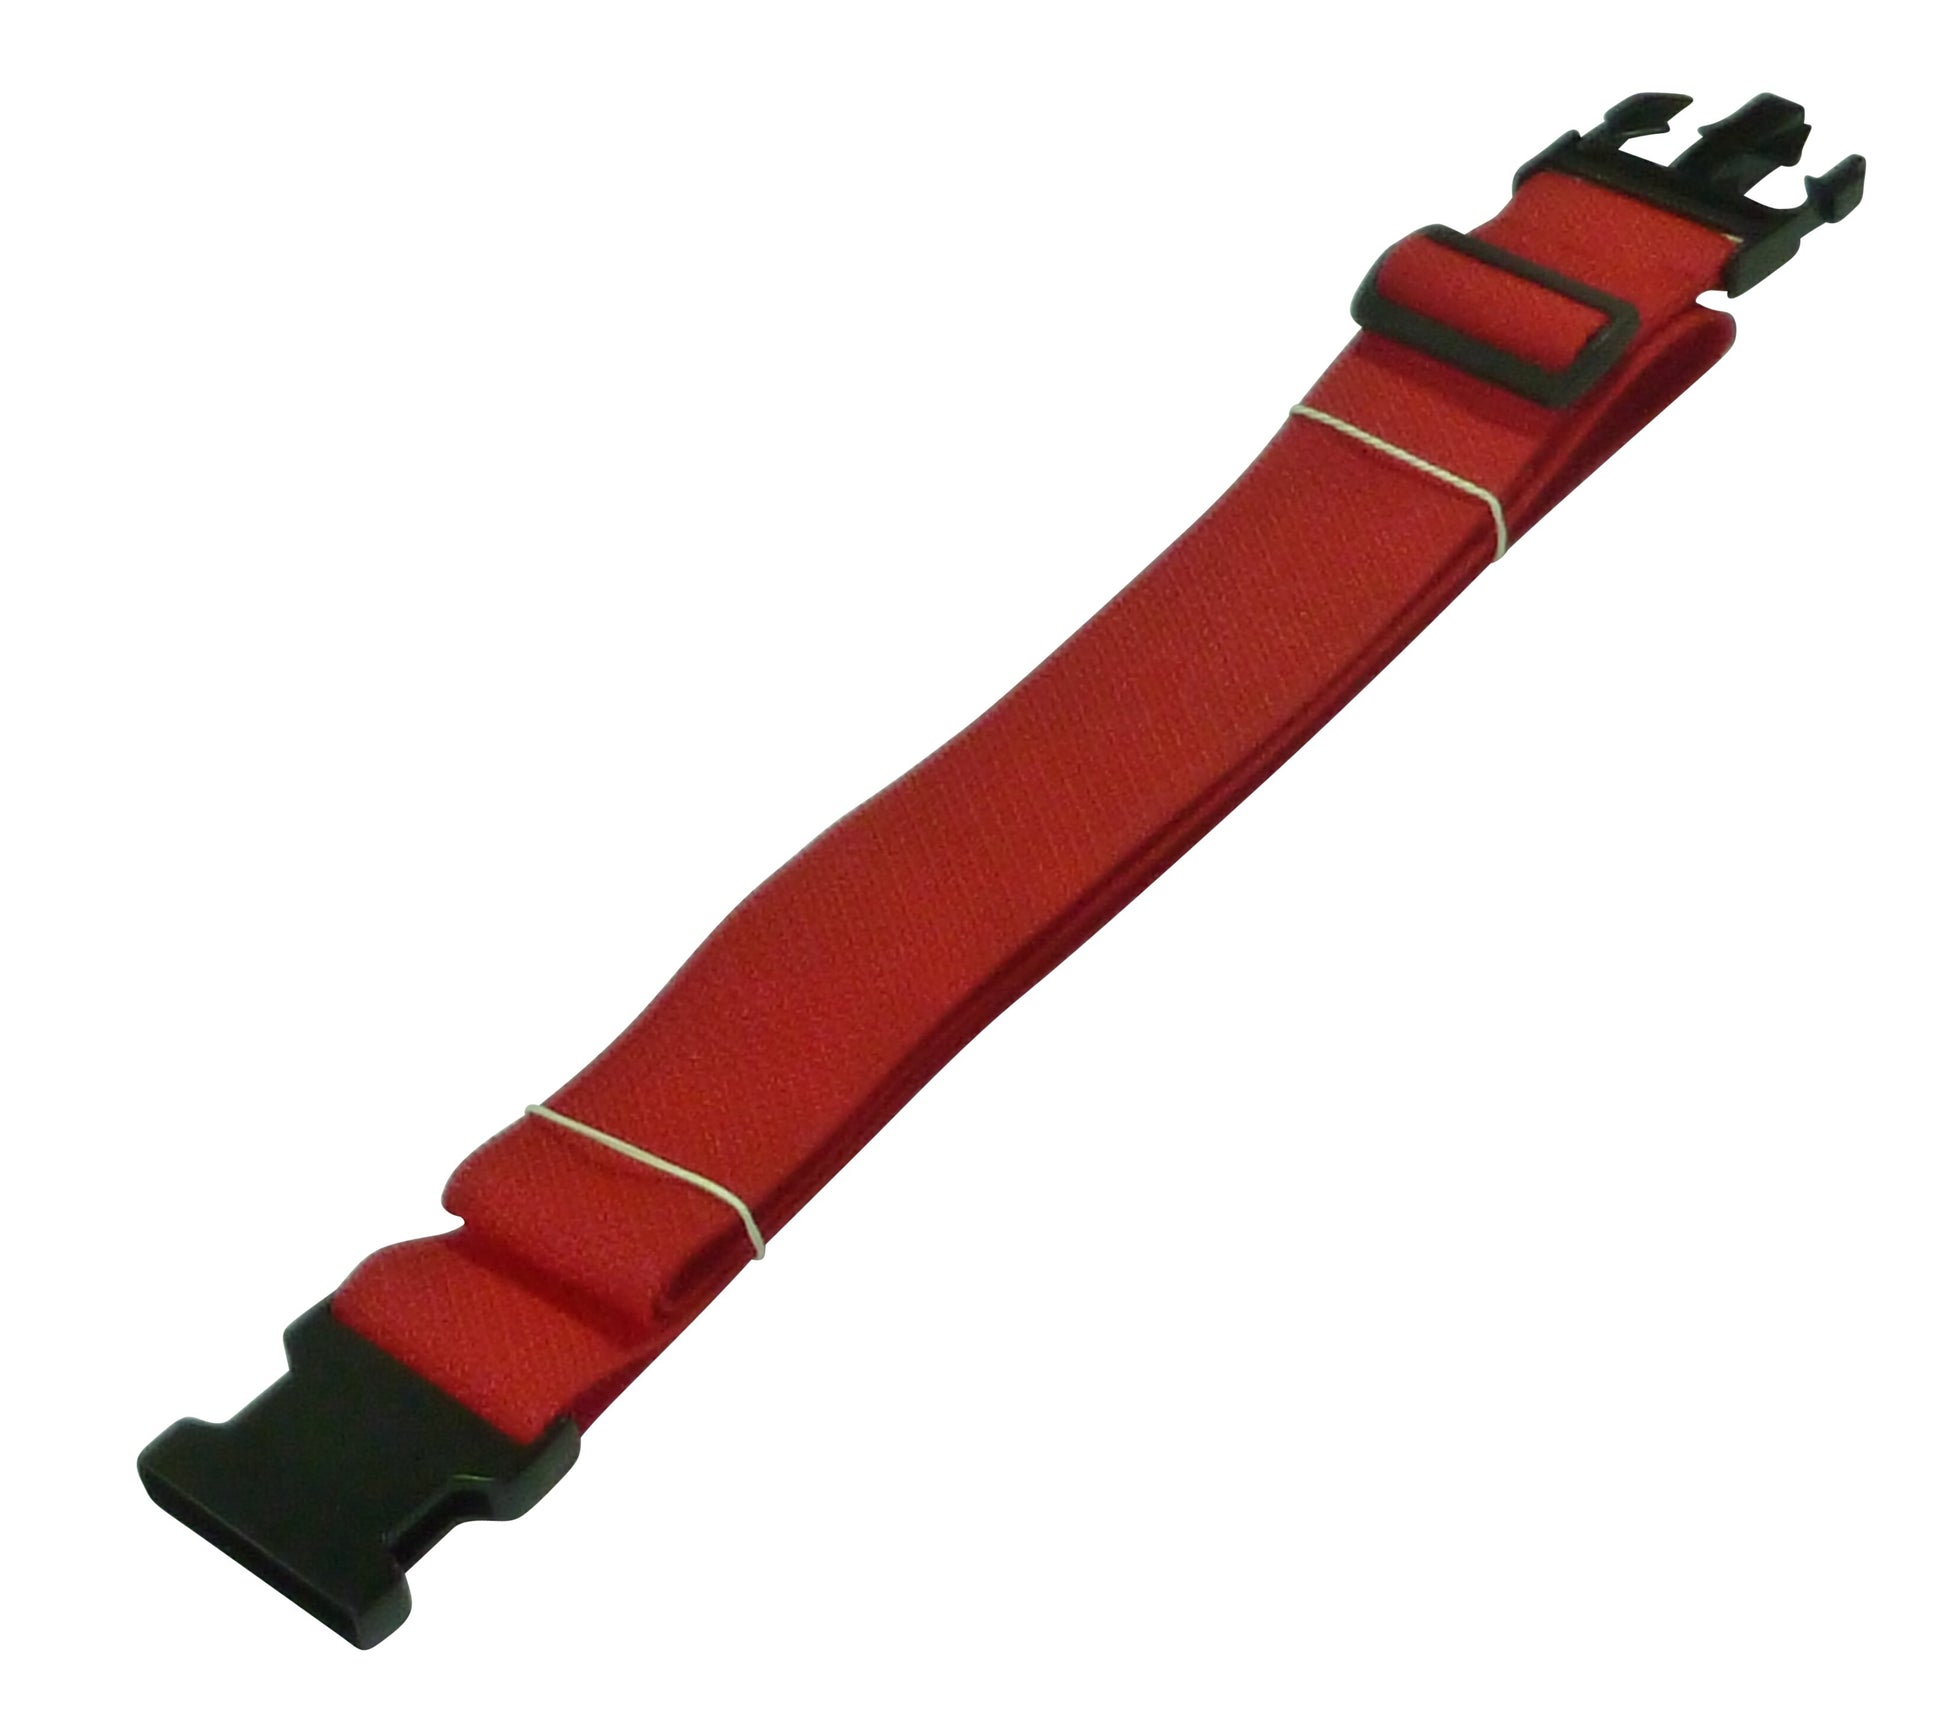 Benristraps Luggage Strap in Red